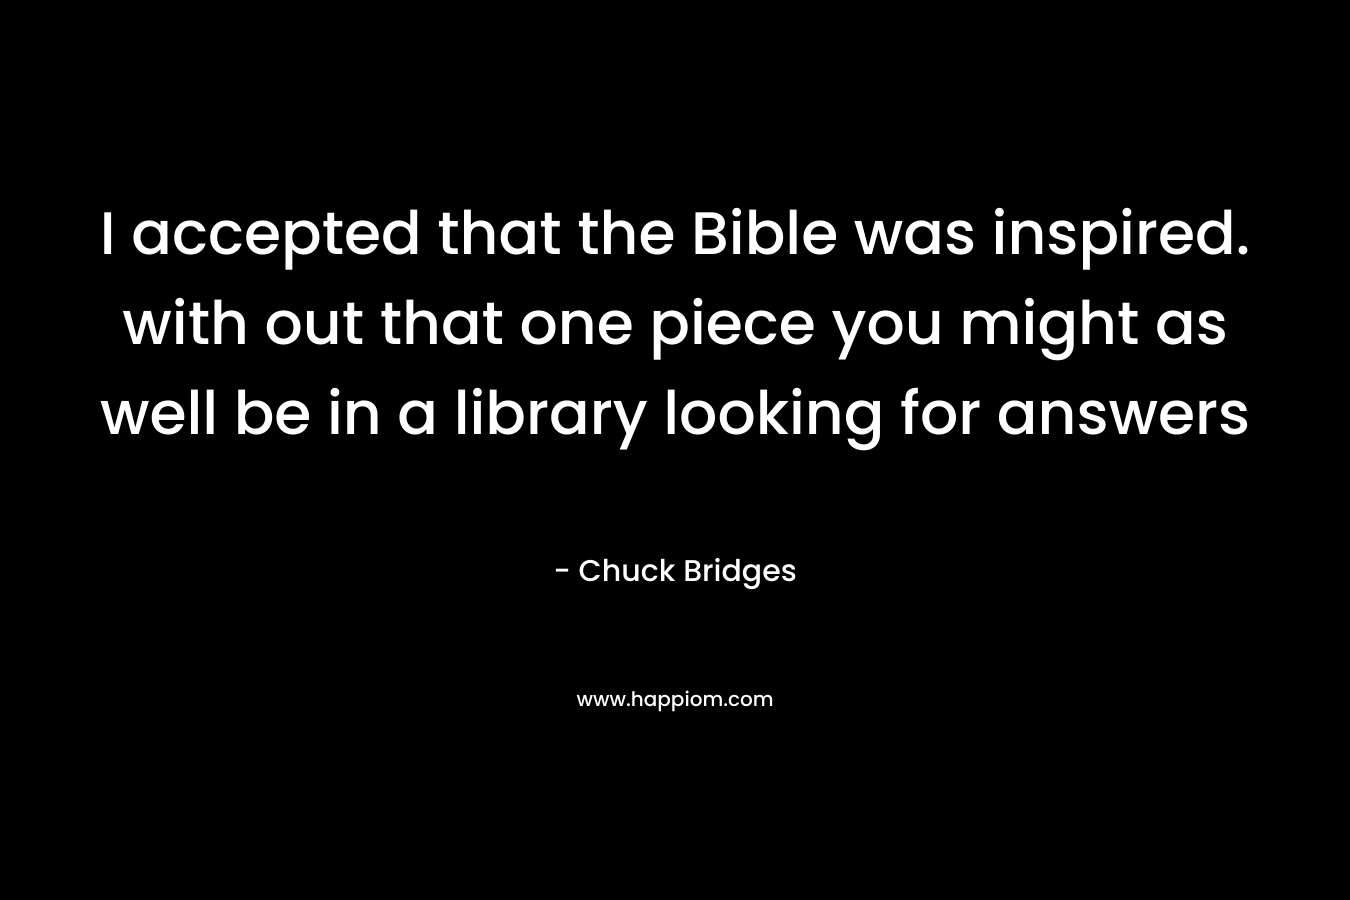 I accepted that the Bible was inspired. with out that one piece you might as well be in a library looking for answers